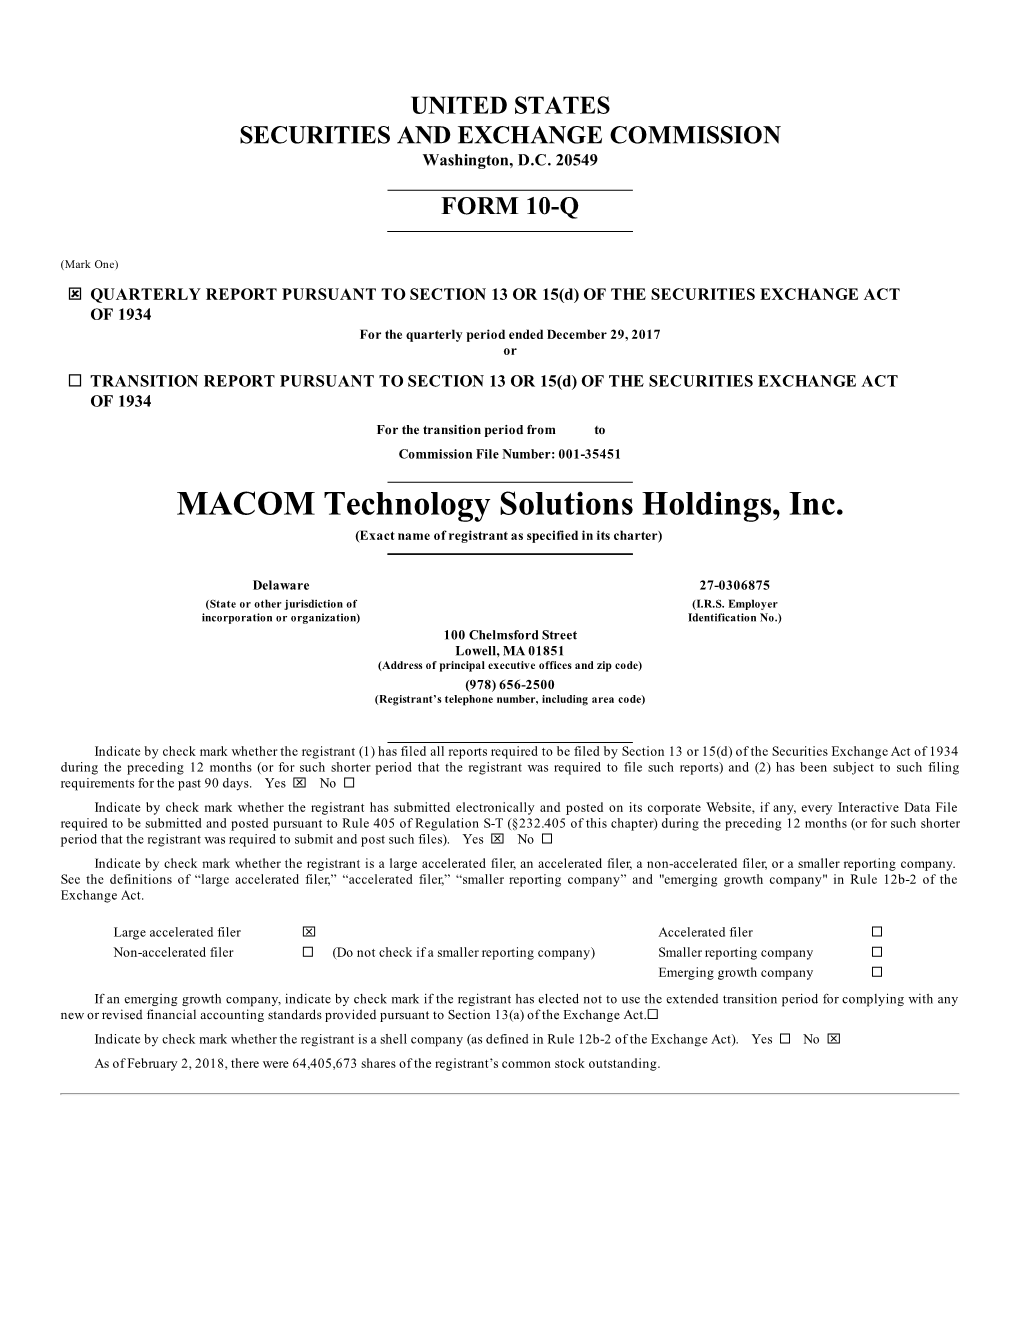 MACOM Technology Solutions Holdings, Inc. (Exact Name of Registrant As Specified in Its Charter)